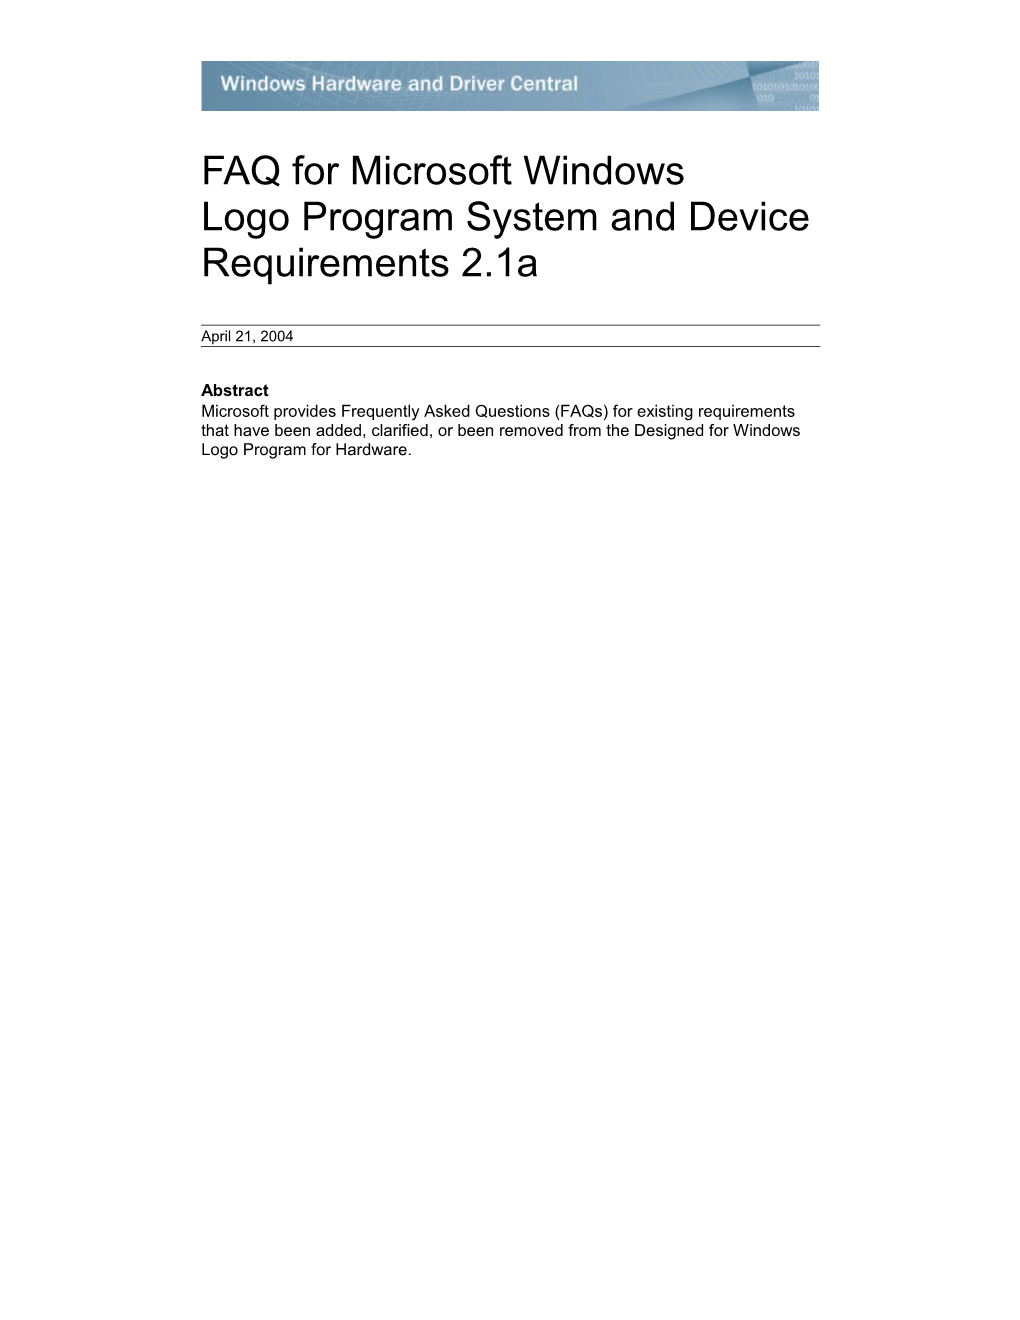 FAQ for Microsoft Windows Logo Program System and Device Requirements 2.1A